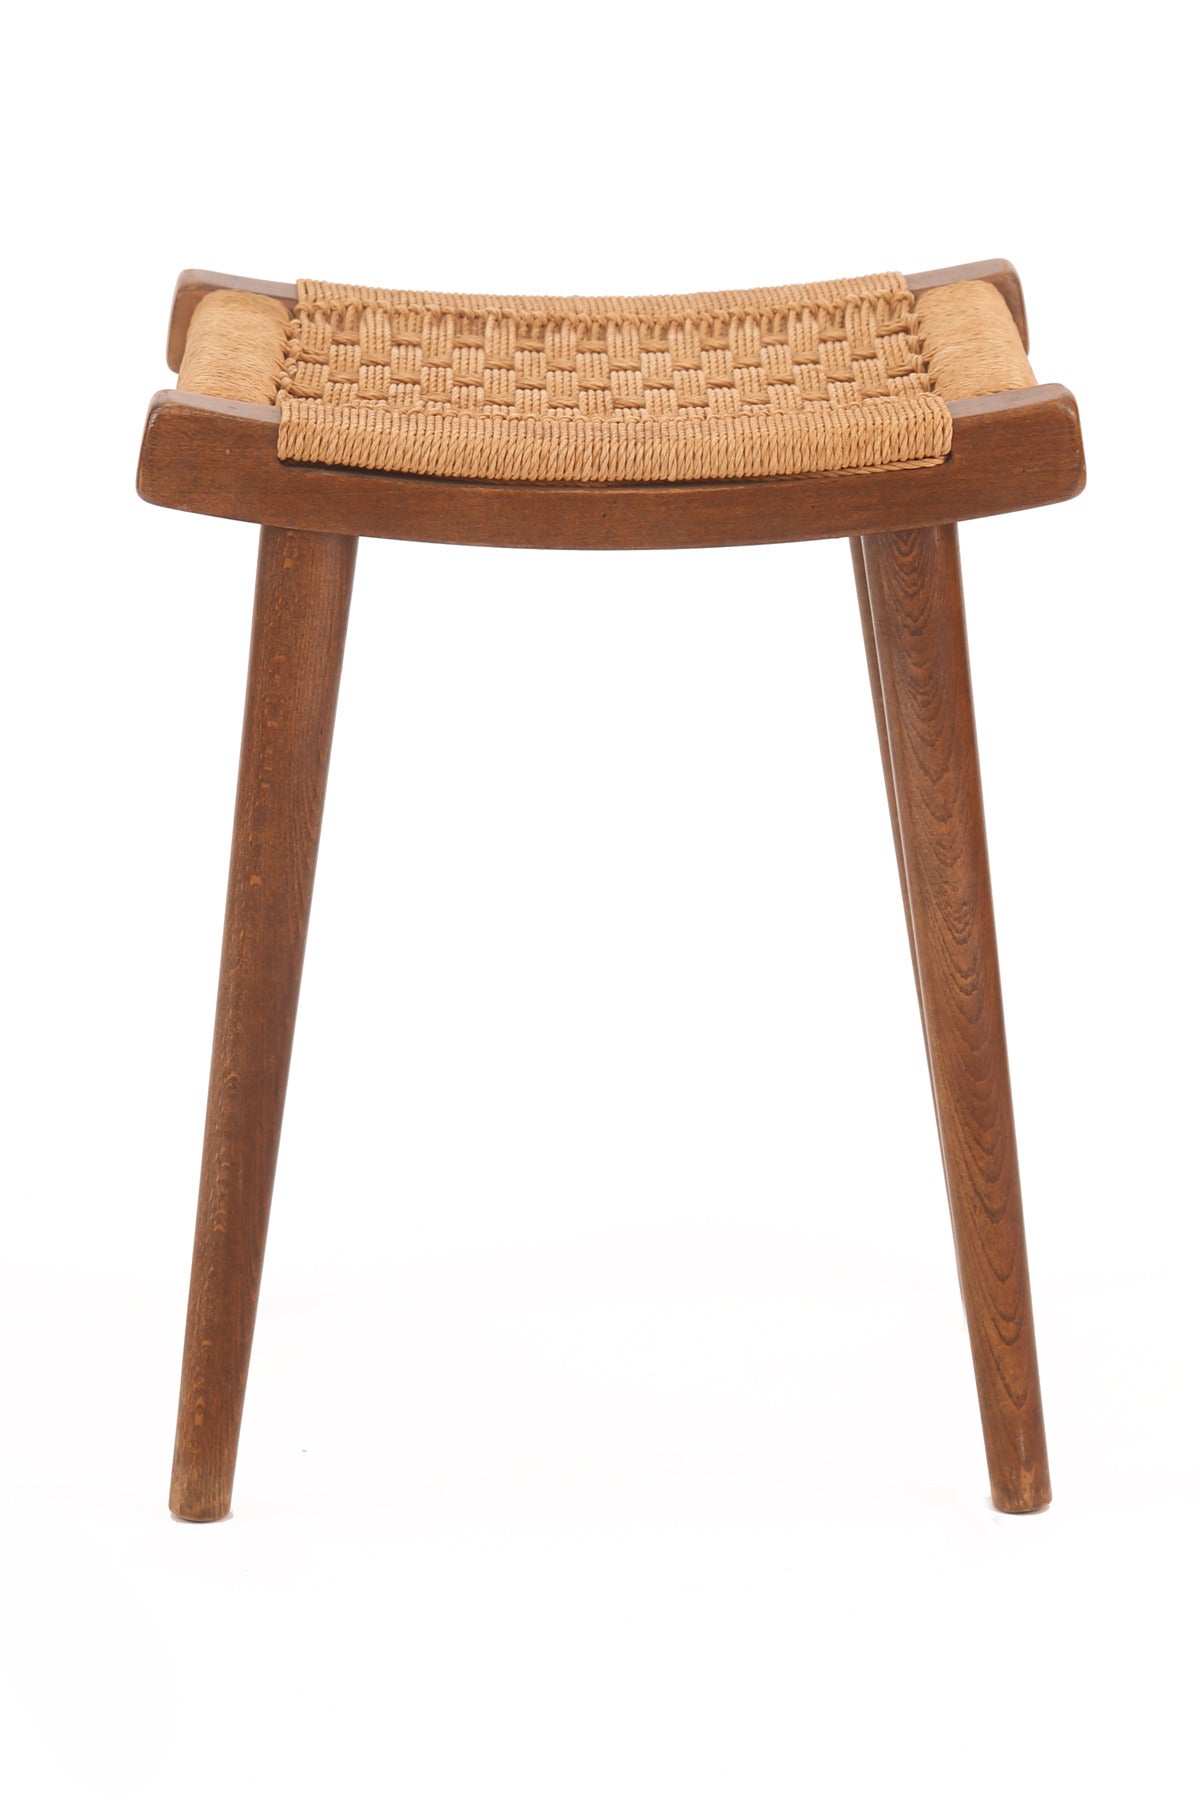 Mid-20th Century Four Teak and Woven Rope Stools or Ottomans